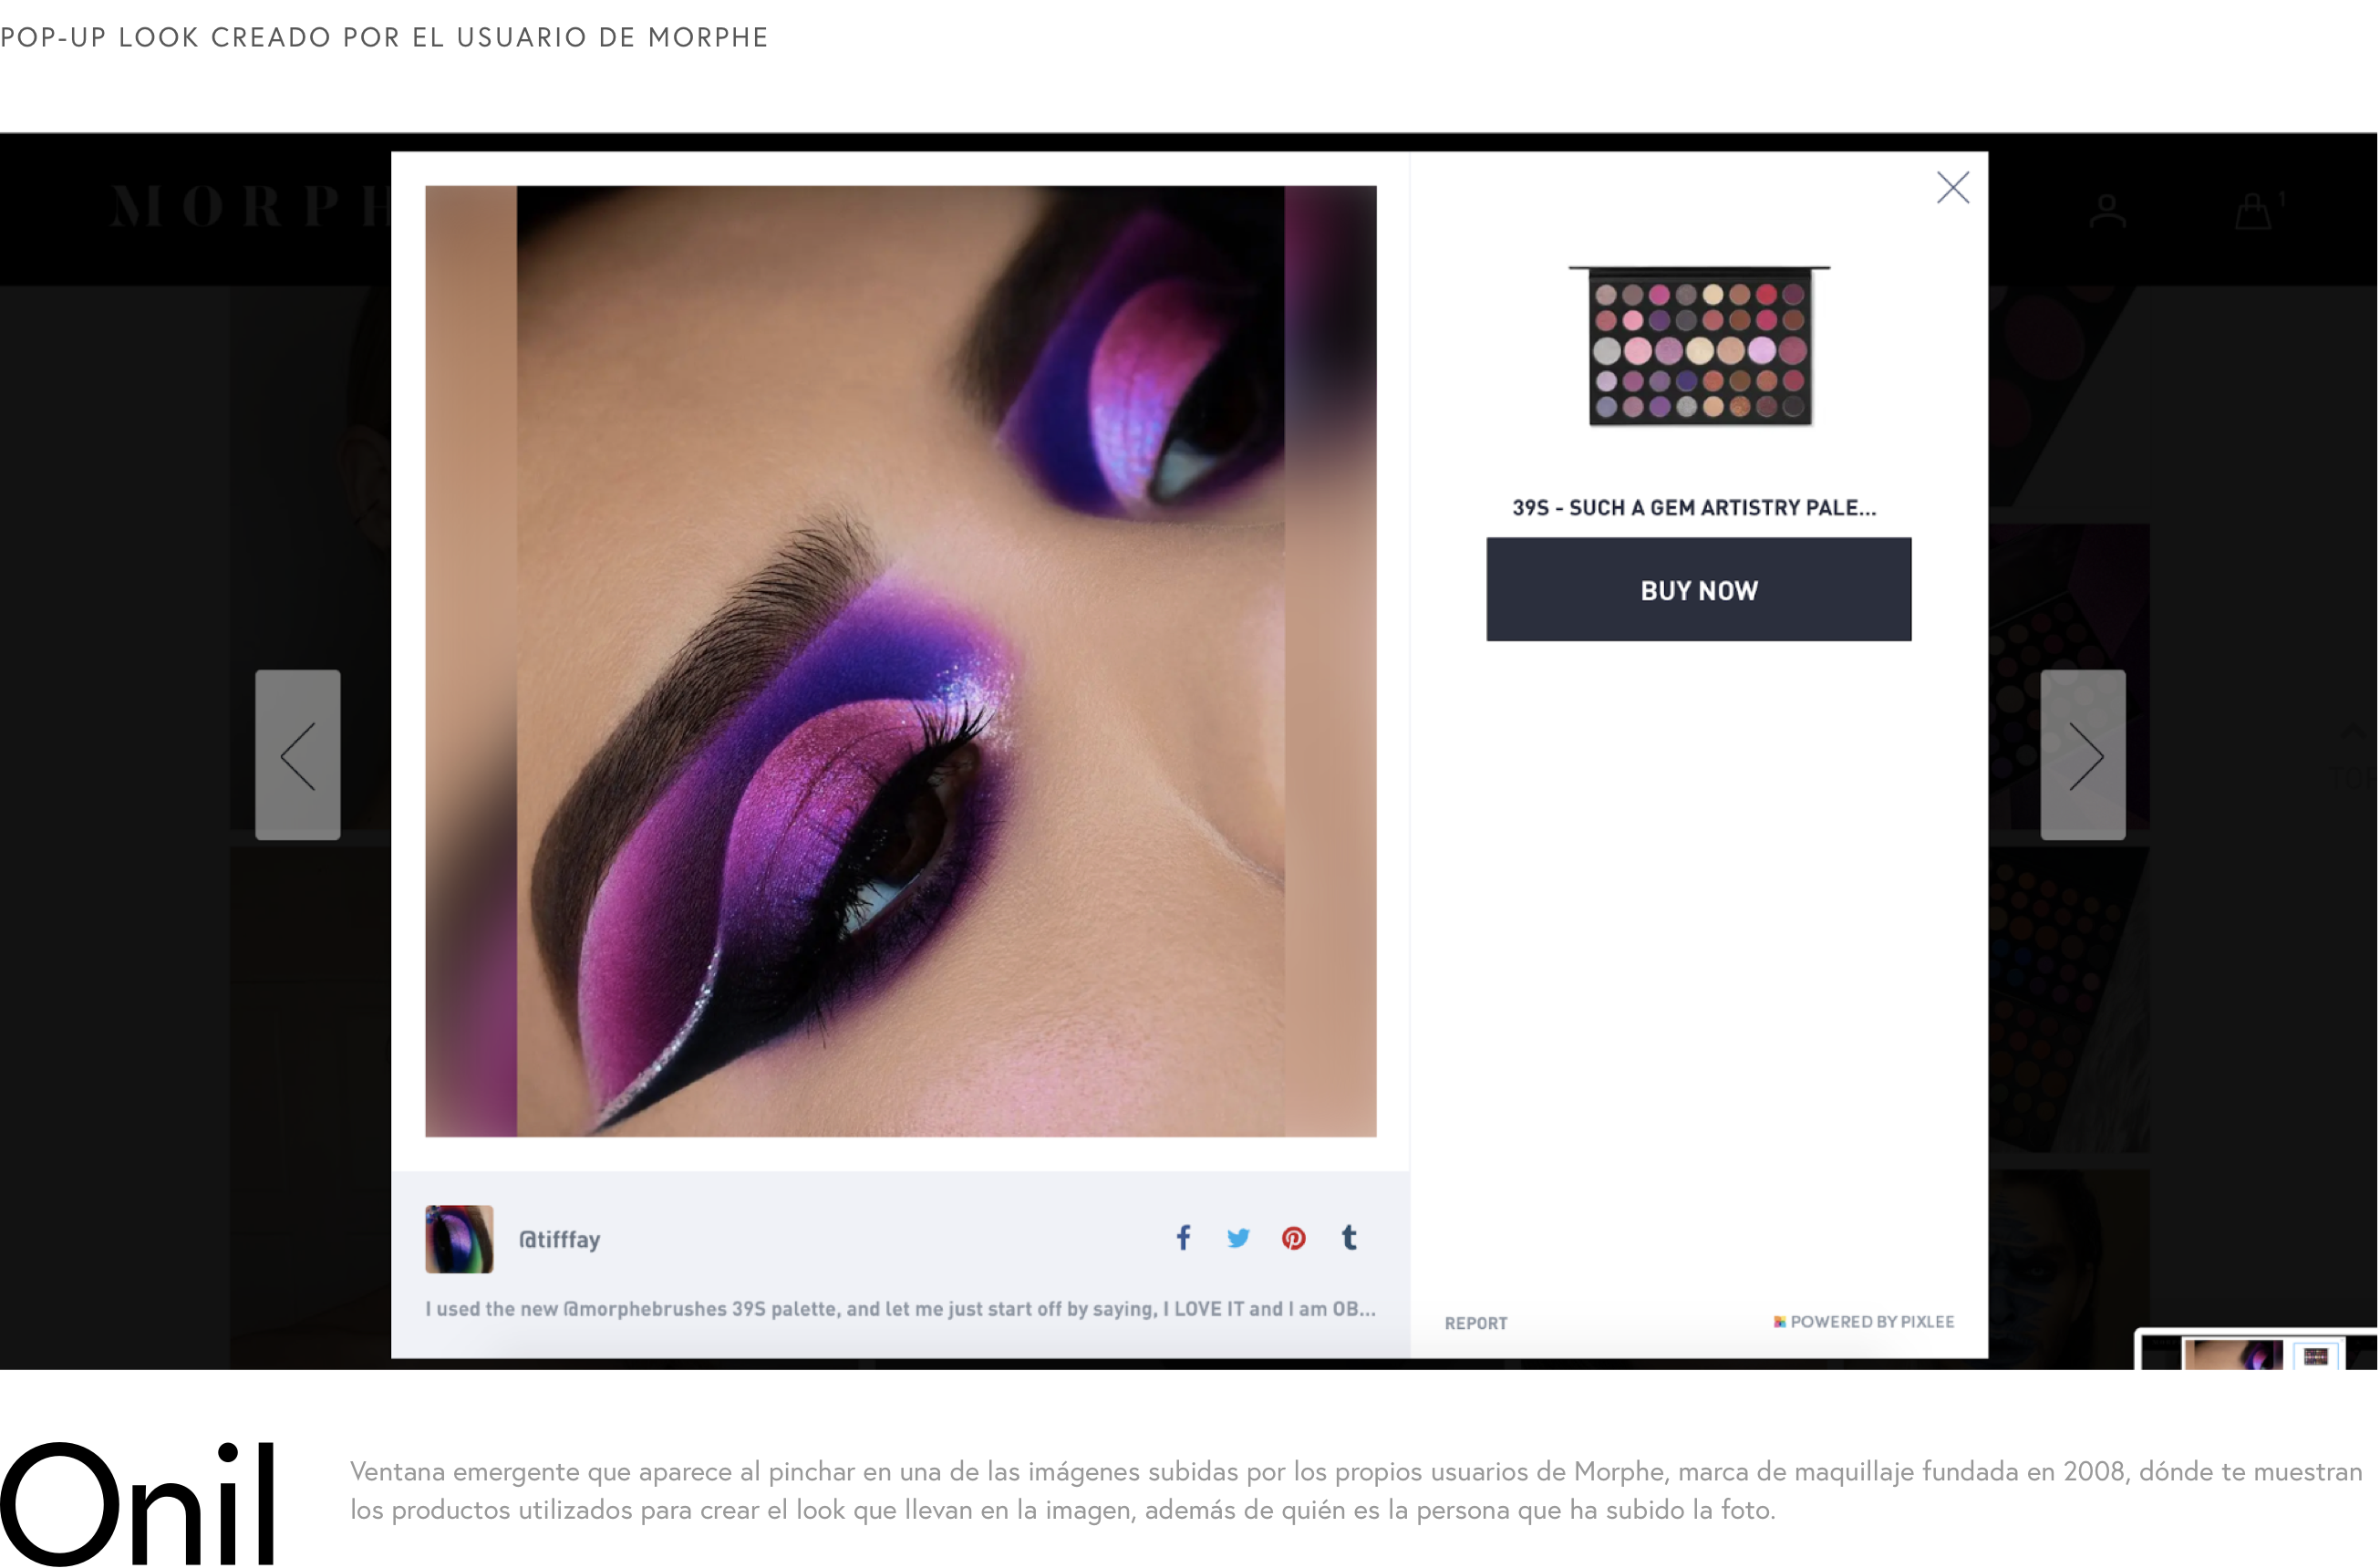 Pop-up look created by the Morphe user - Pop-up window that appears when you click on one of the images uploaded by the Morphe users themselves, where they show you the products used to create the look they wear in the image.